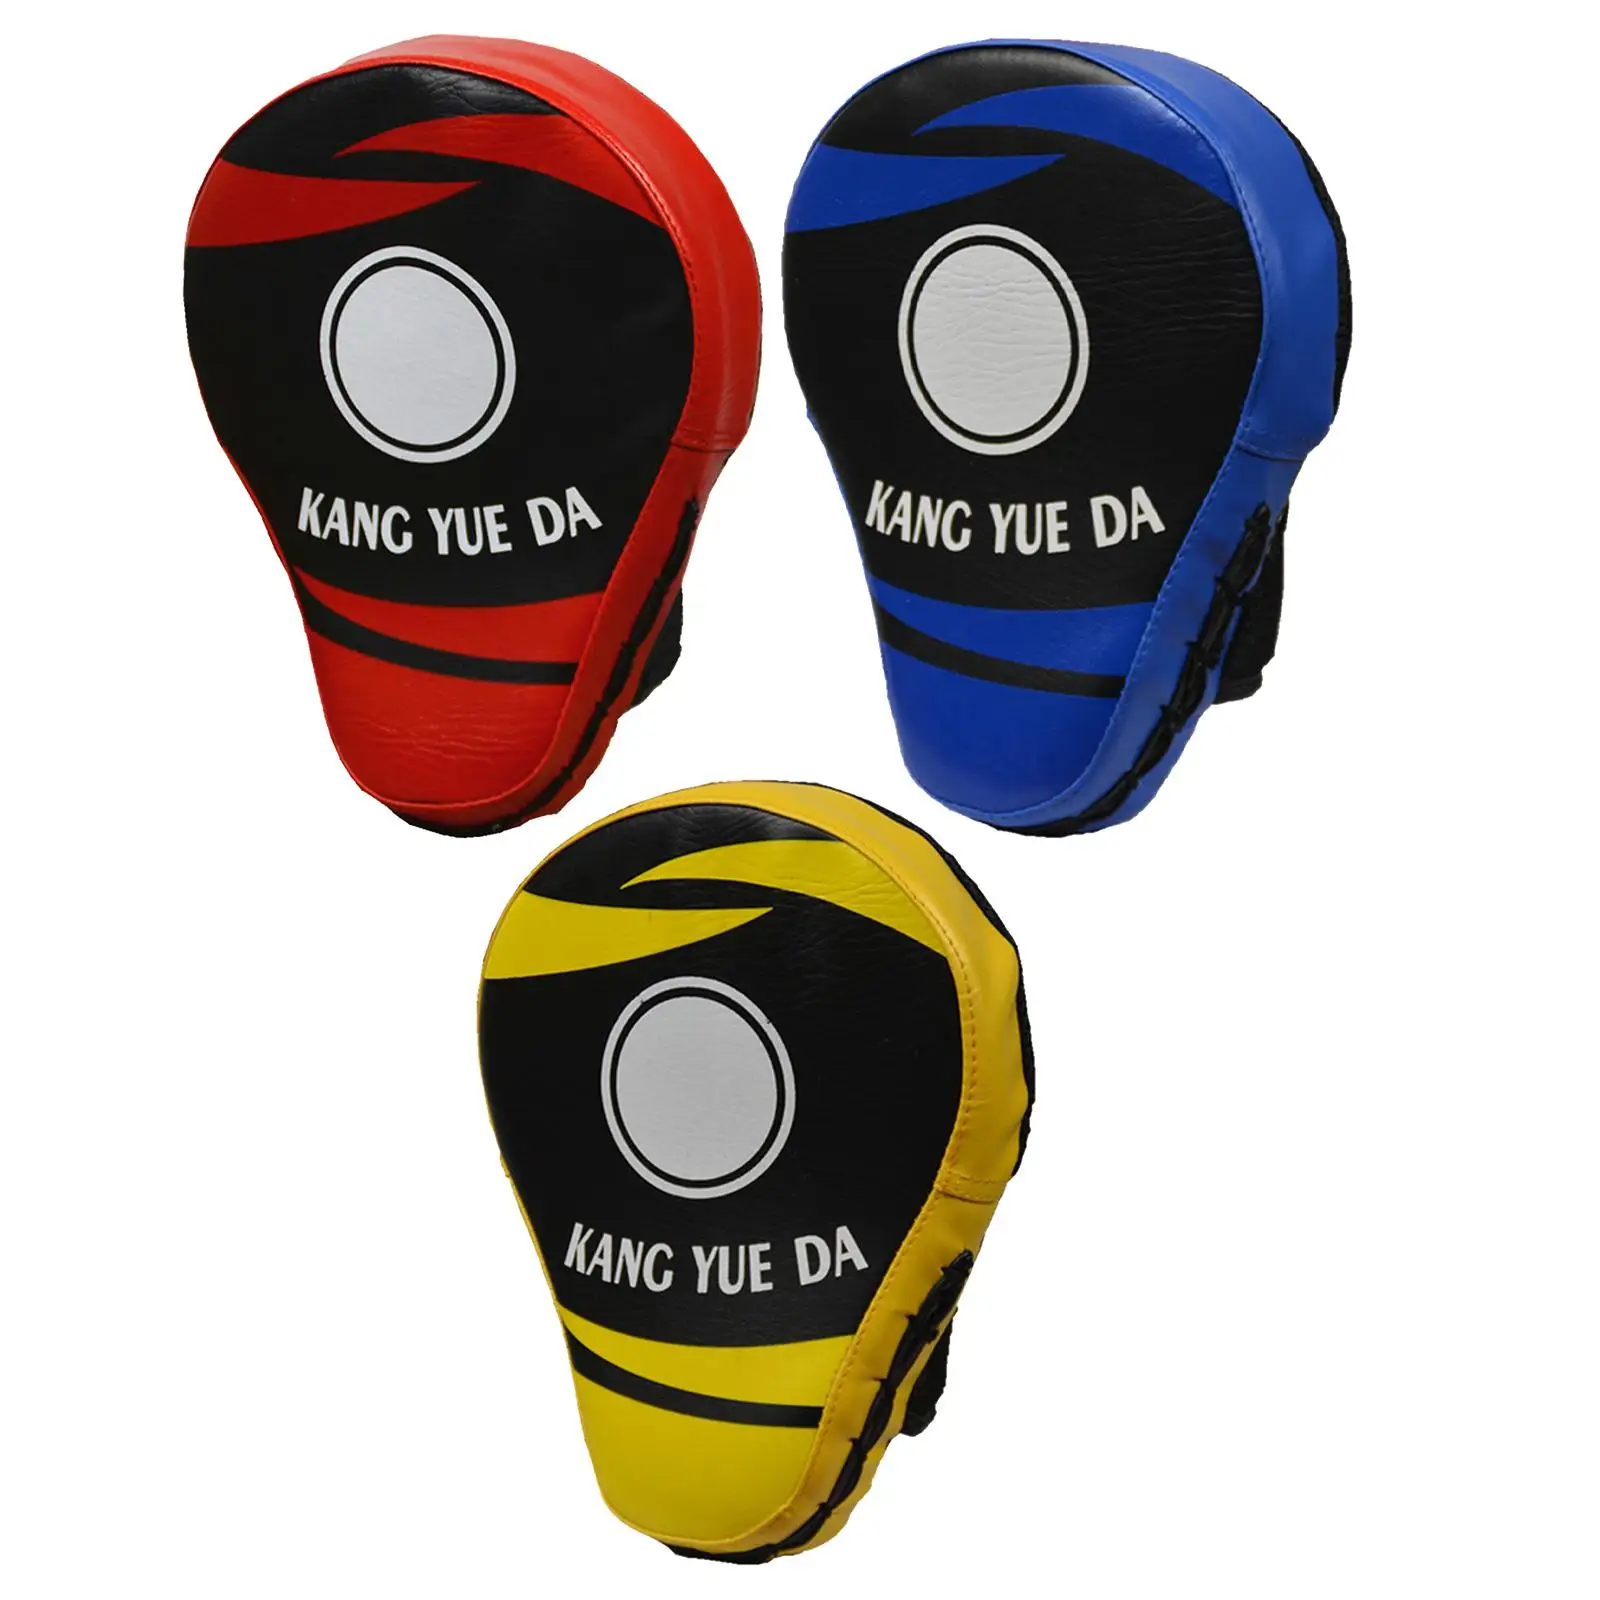 PU Lether Kick Shield Strike Pd Focus Pds Trining Shield Hnd Trget Pd Equipment for Mm Kickboxing Snd Thi Prcticing